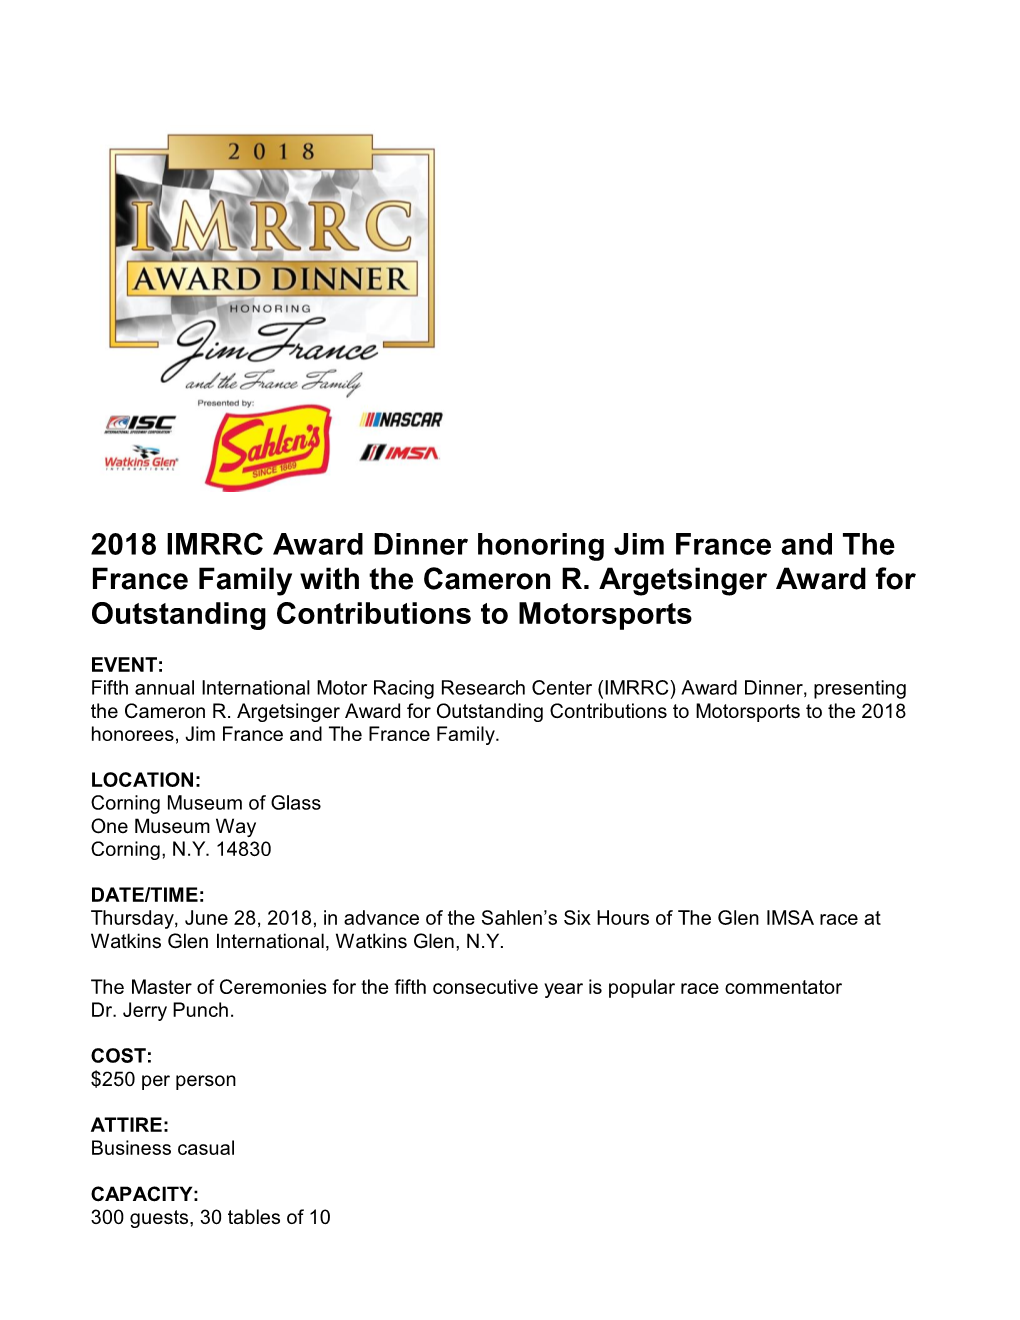 2018 IMRRC Award Dinner Honoring Jim France and the France Family with the Cameron R